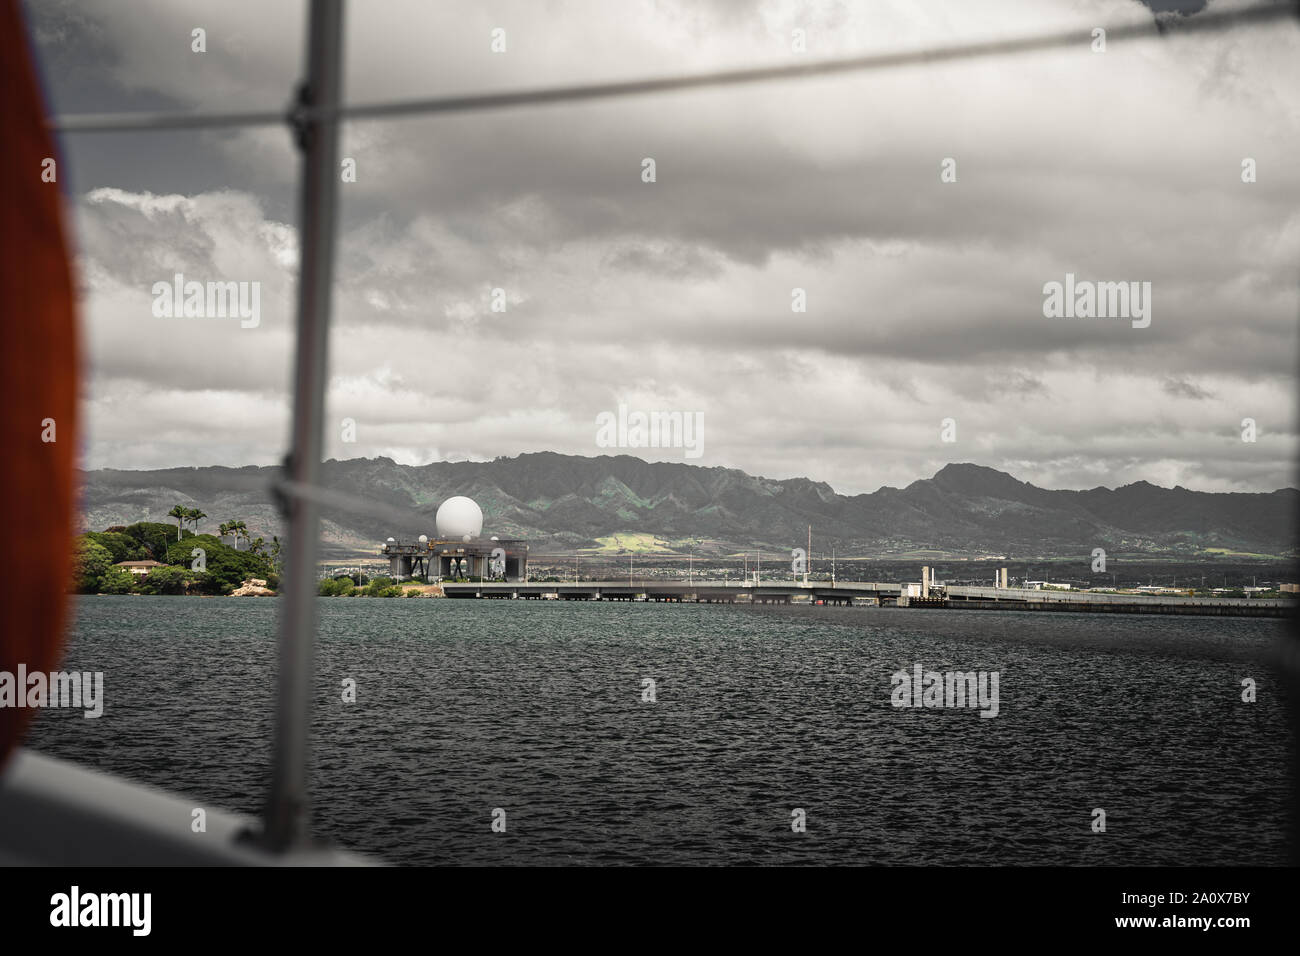 Pearl Harbor, Hawaii - August 23rd 2019: Mountain views in the background of Fort Island Bridge. Taken from Pearl Harbor National Memorial. Stock Photo